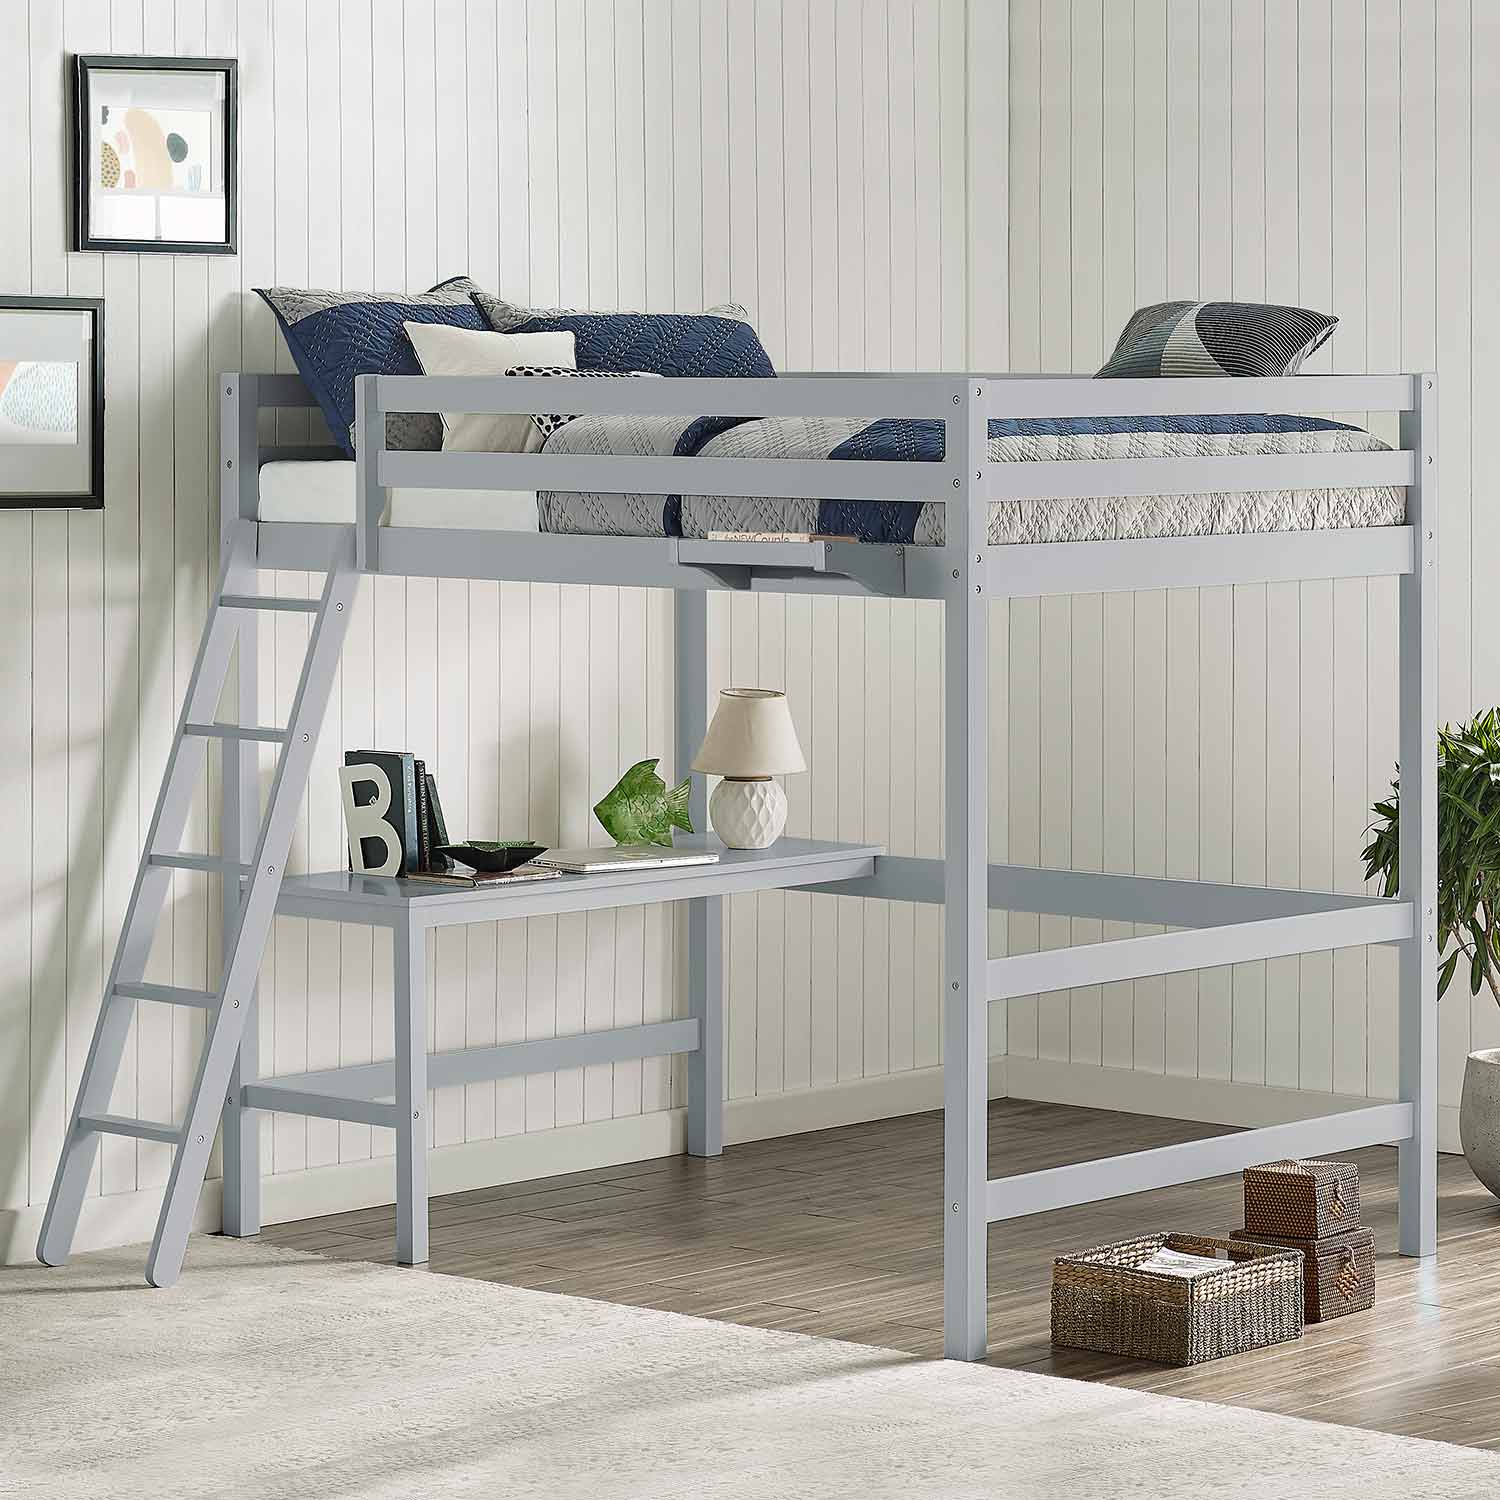 Hillsdale Caspian Full Loft Bed with Hanging Nightstand - Gray